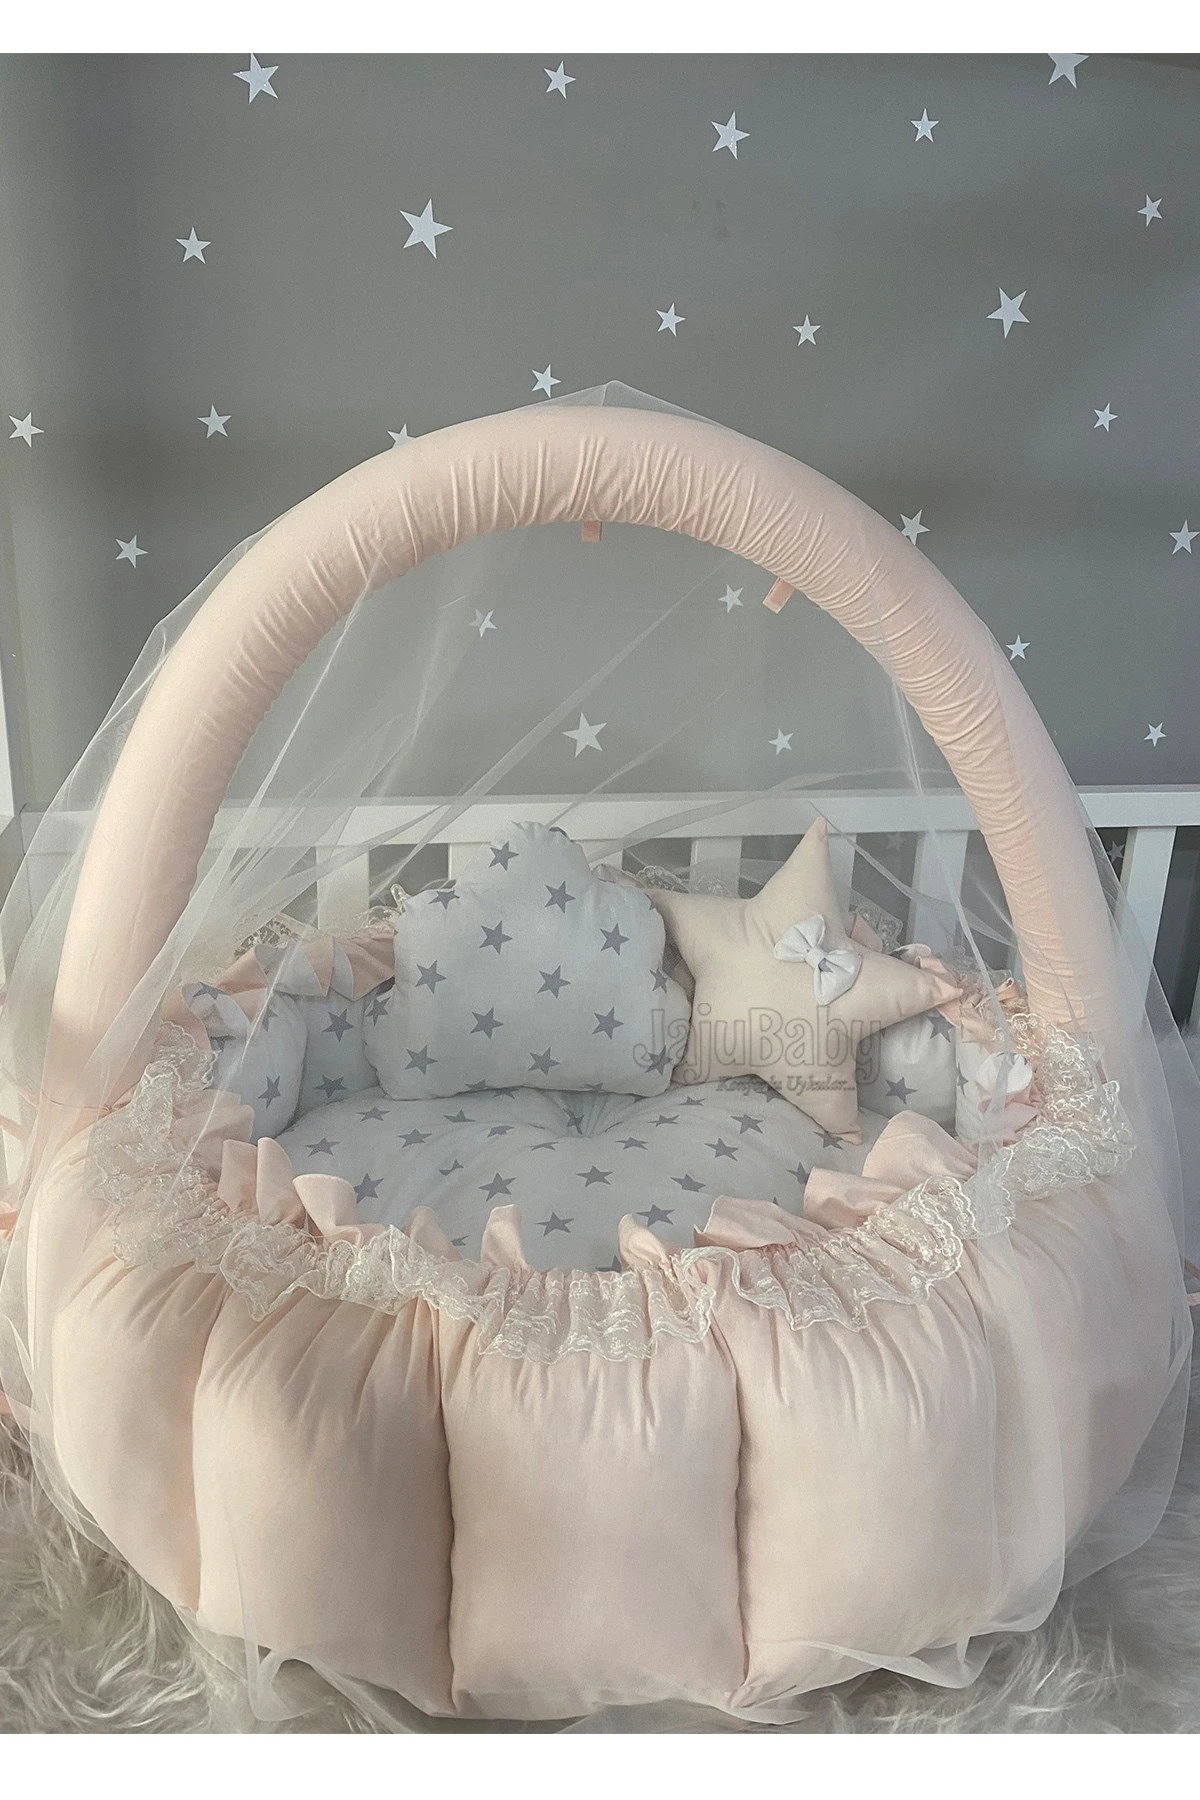 Jaju Baby Handmade Salmon Color Open Close Play Mat Babynest With Mosquito Net Apparatus Activity Centers Entertainers Aliexpress